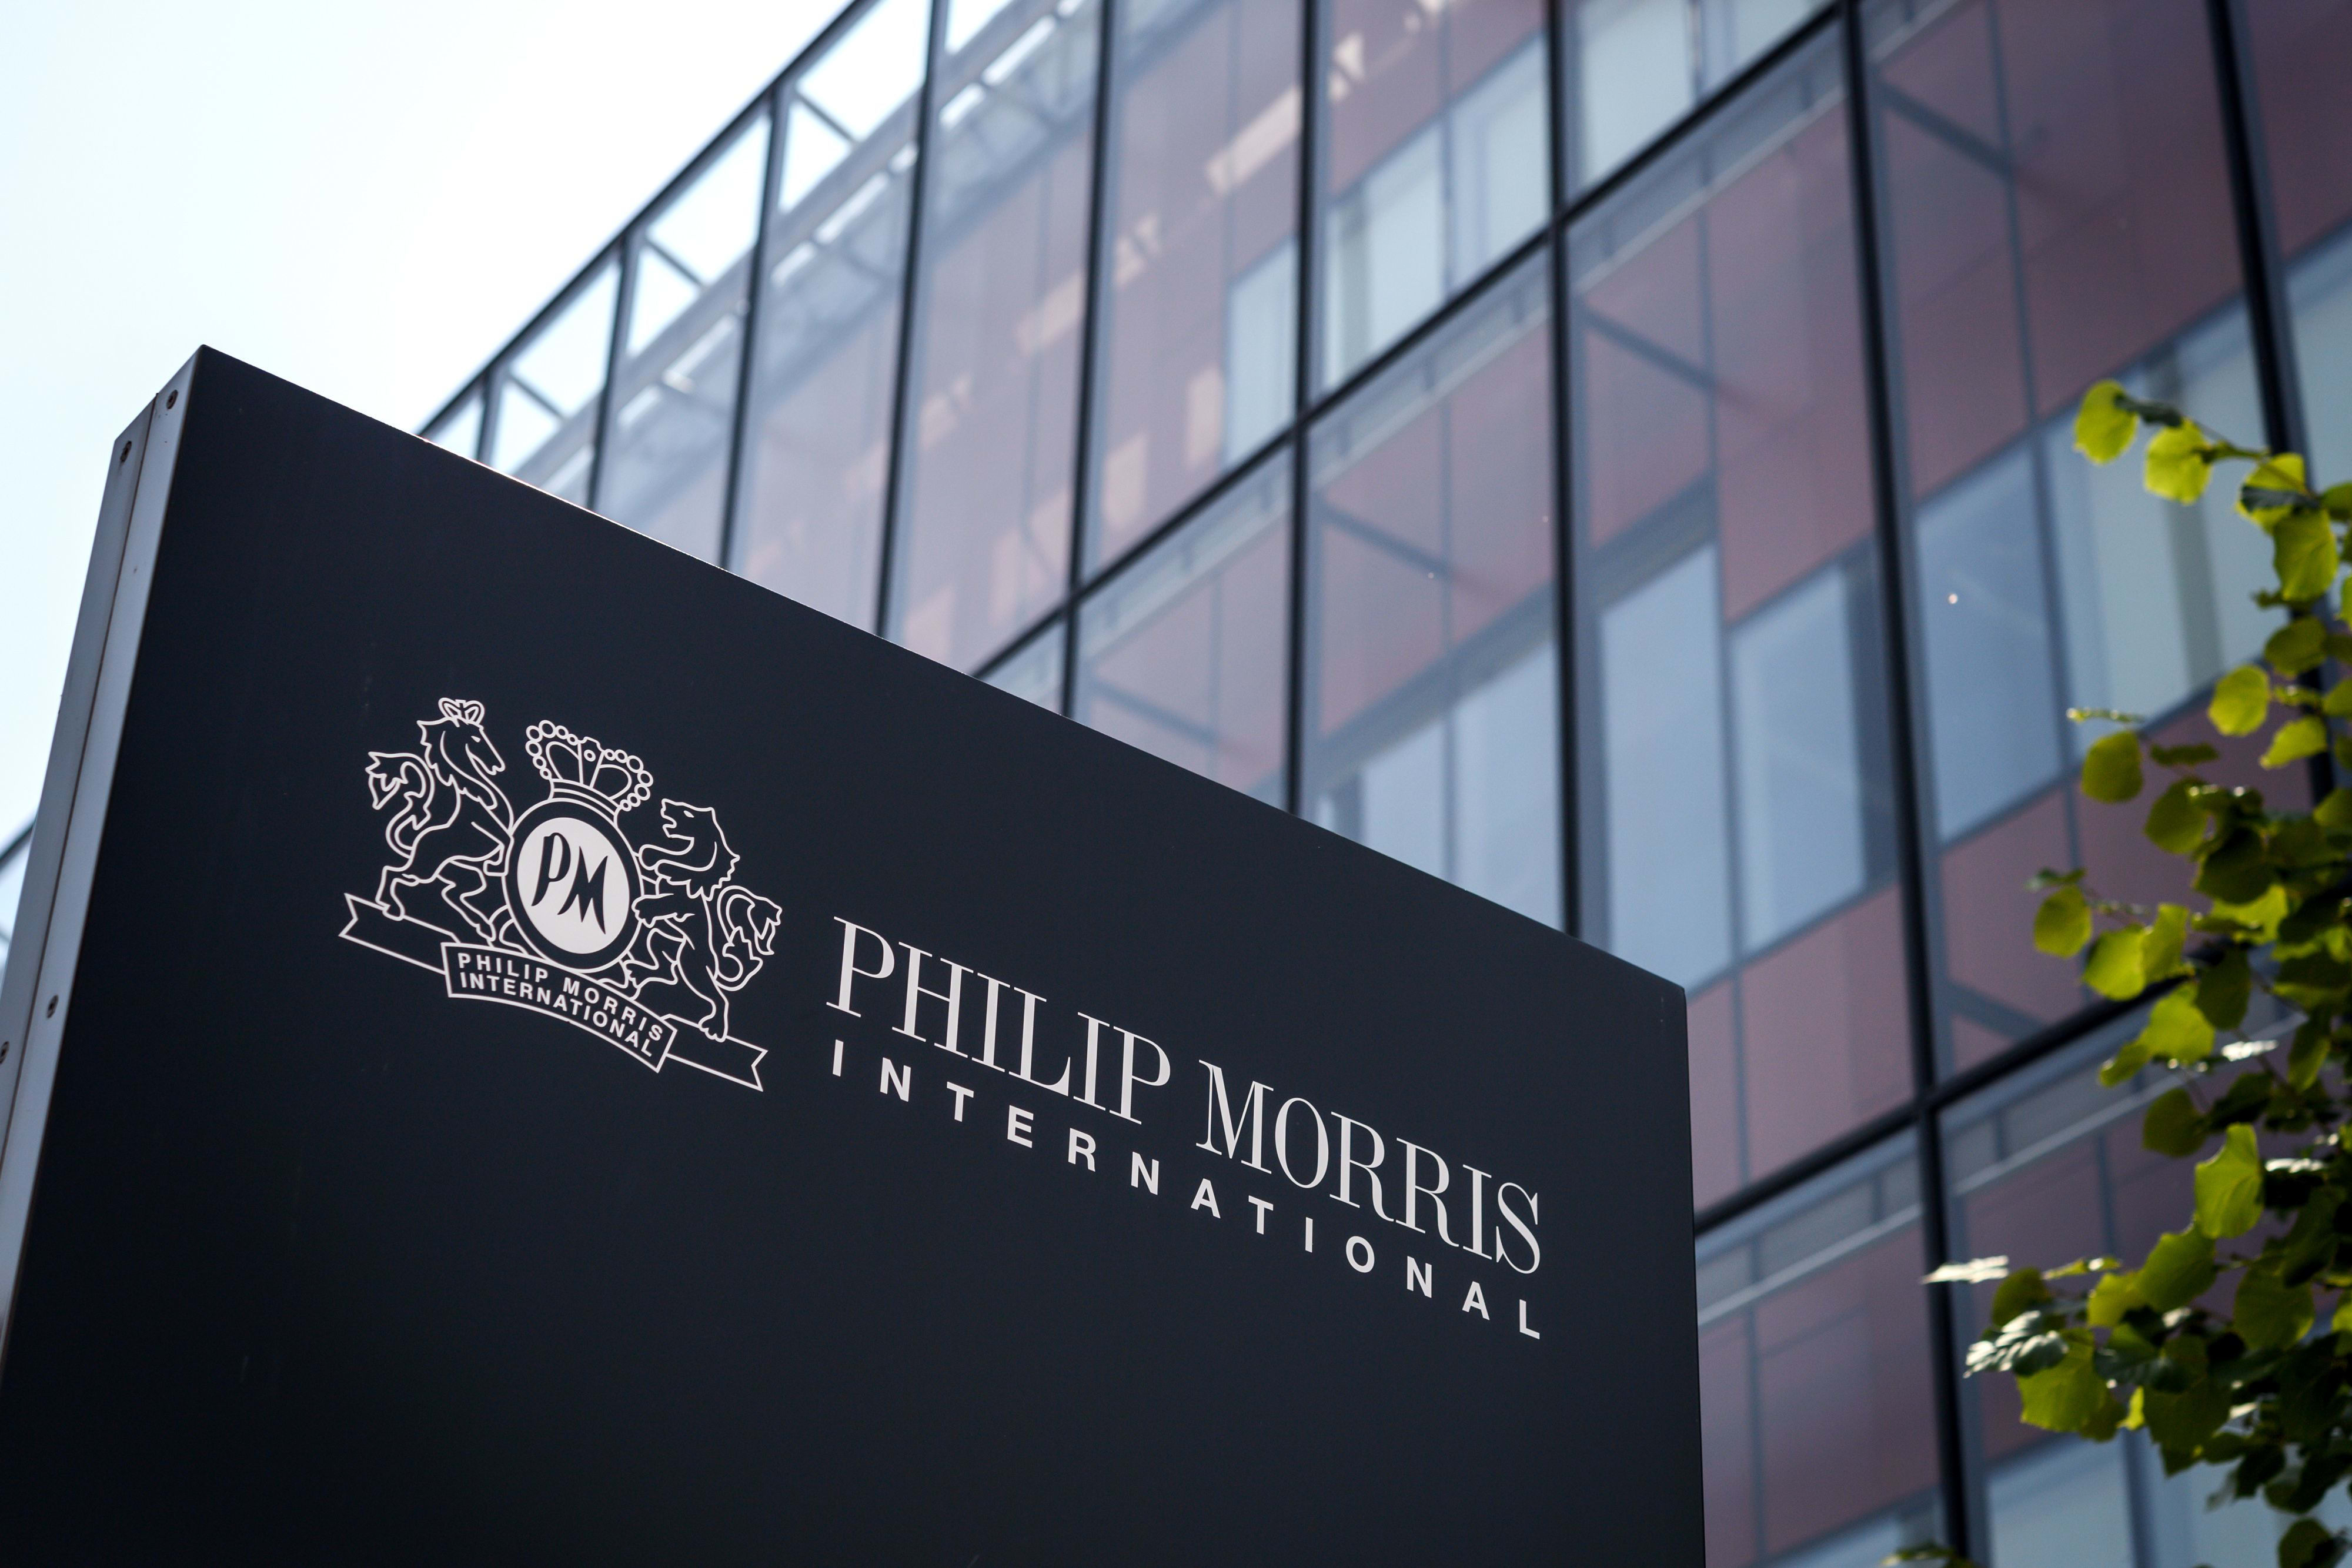 Philip Morris International confirms it's in merger talks with Altria